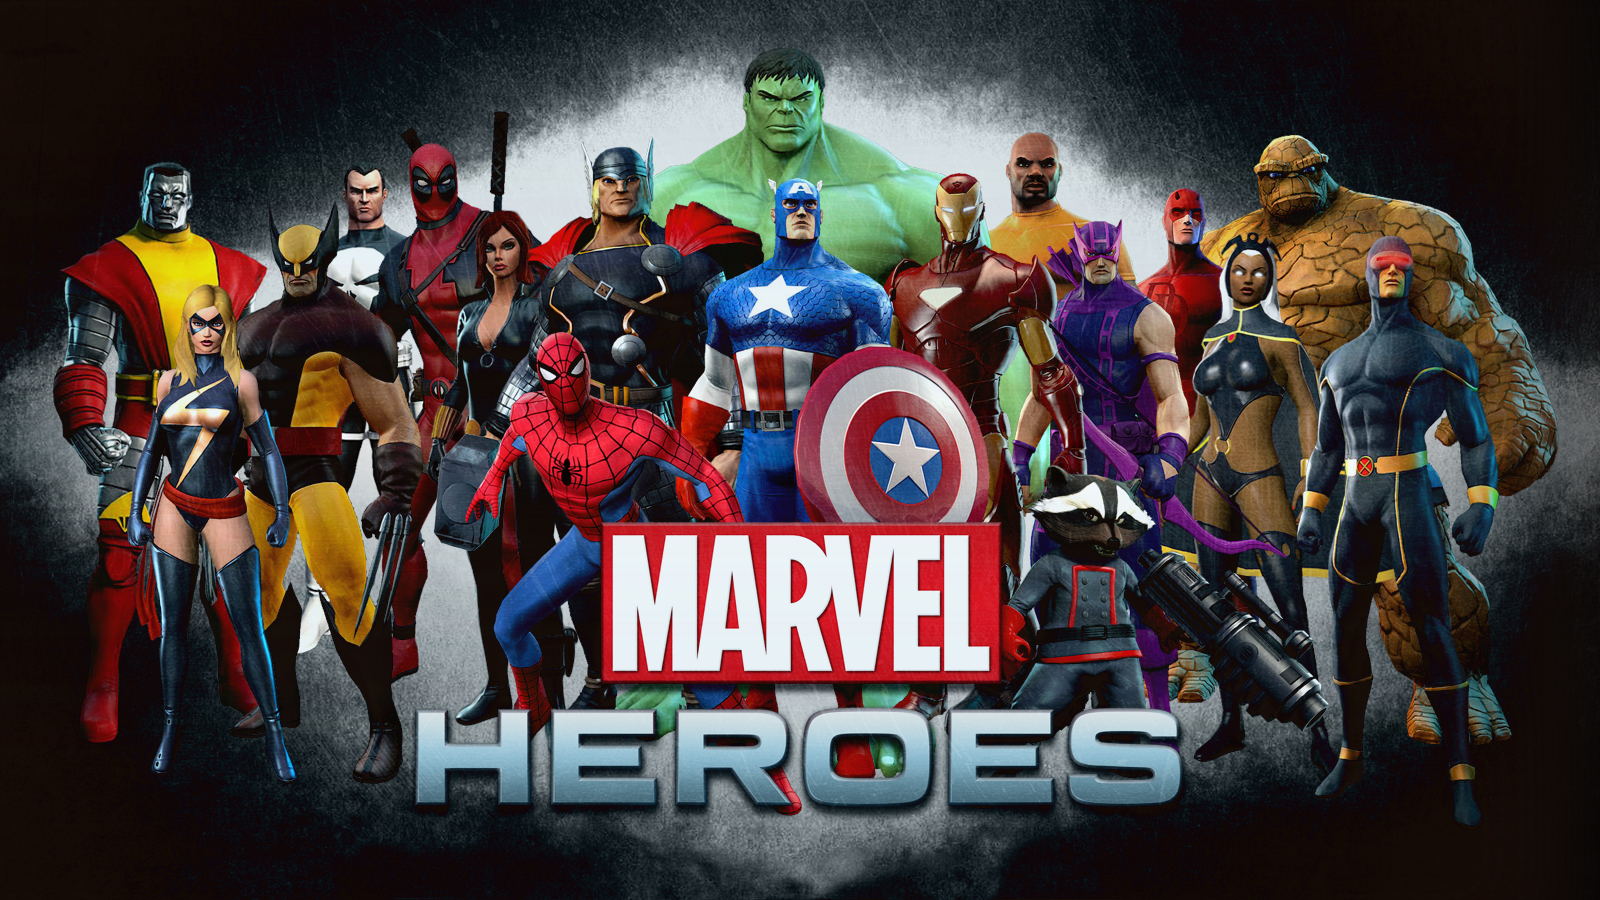 Marvel Heroes Wallpaper by Squiddytron on